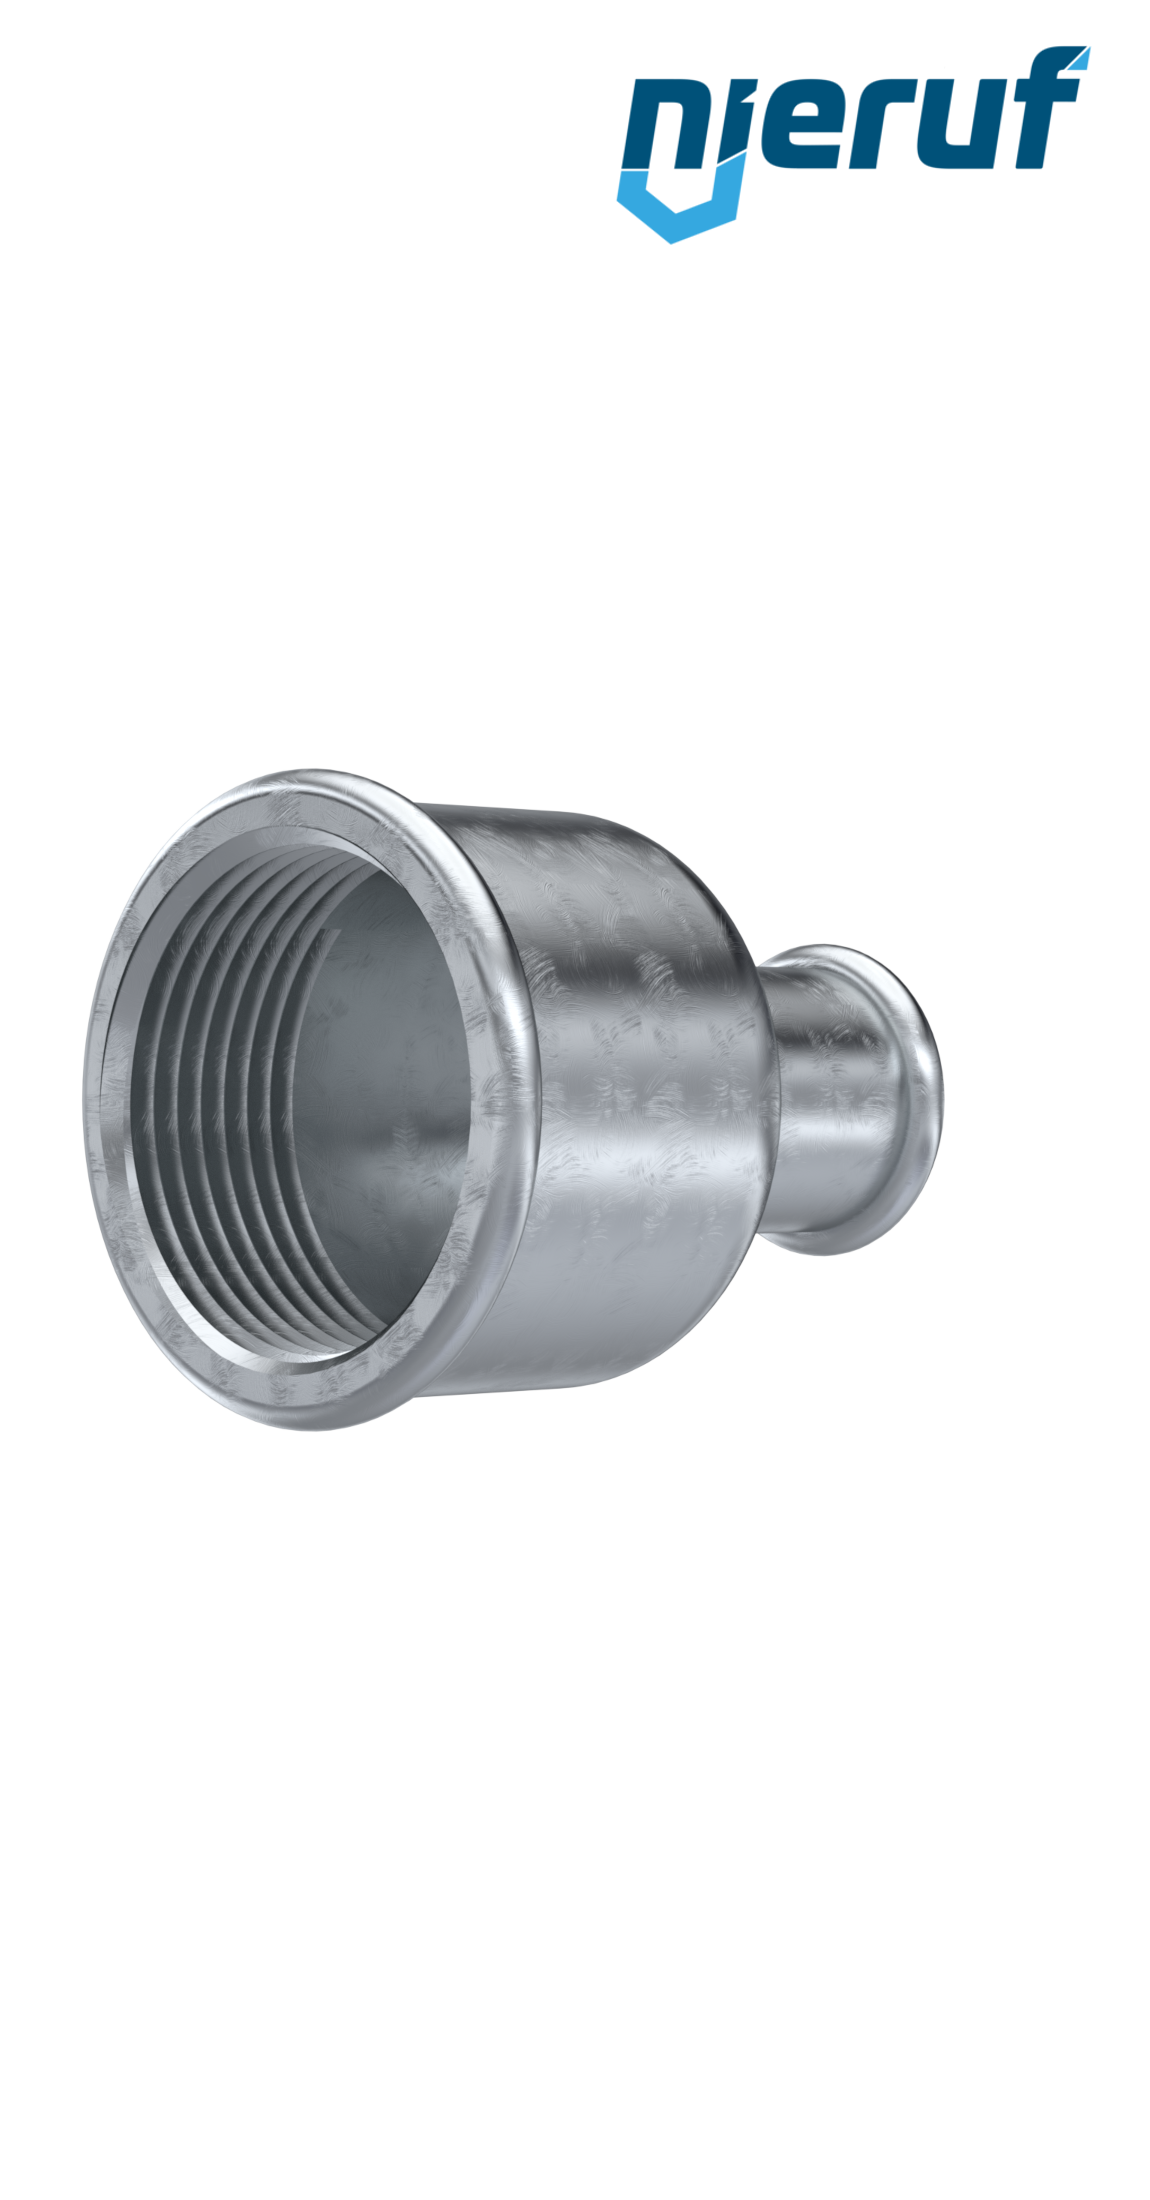 Malleable cast iron fitting reducing socket no. 240, 3/4" x 1/2" inch galvanized